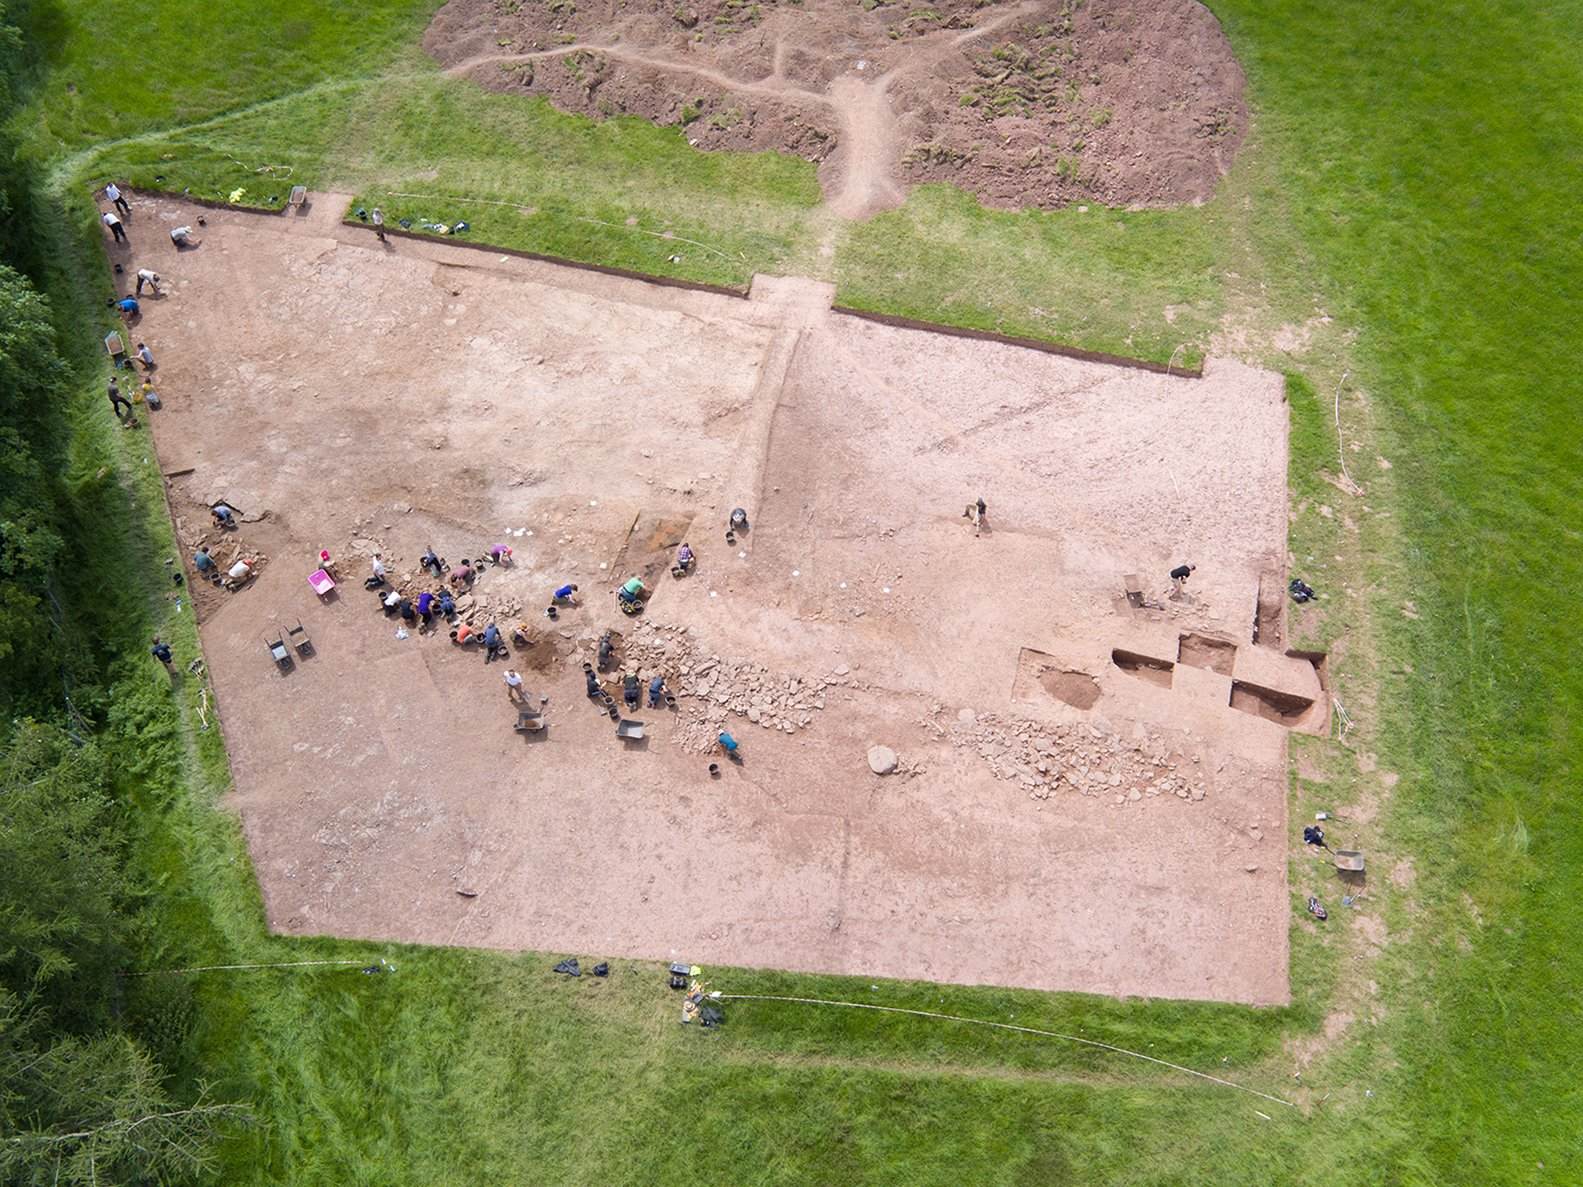 Remarkable complex of early Neolithic monuments discovered in Herefordshire, England 2